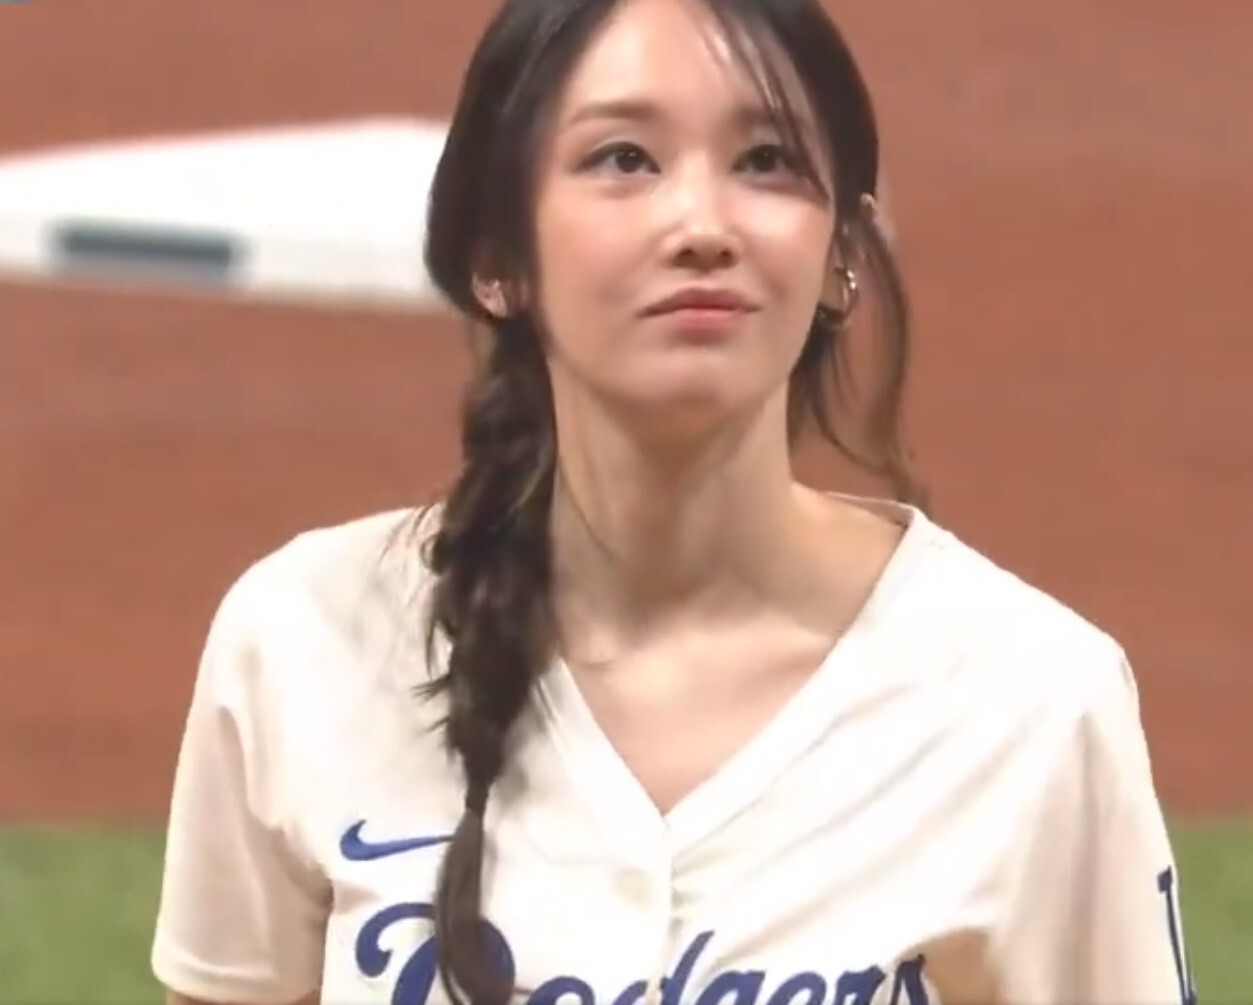 Players’ Reaction To Korean Star Jeon Jong-seo’s First Pitch at Dodgers Game is Going Viral